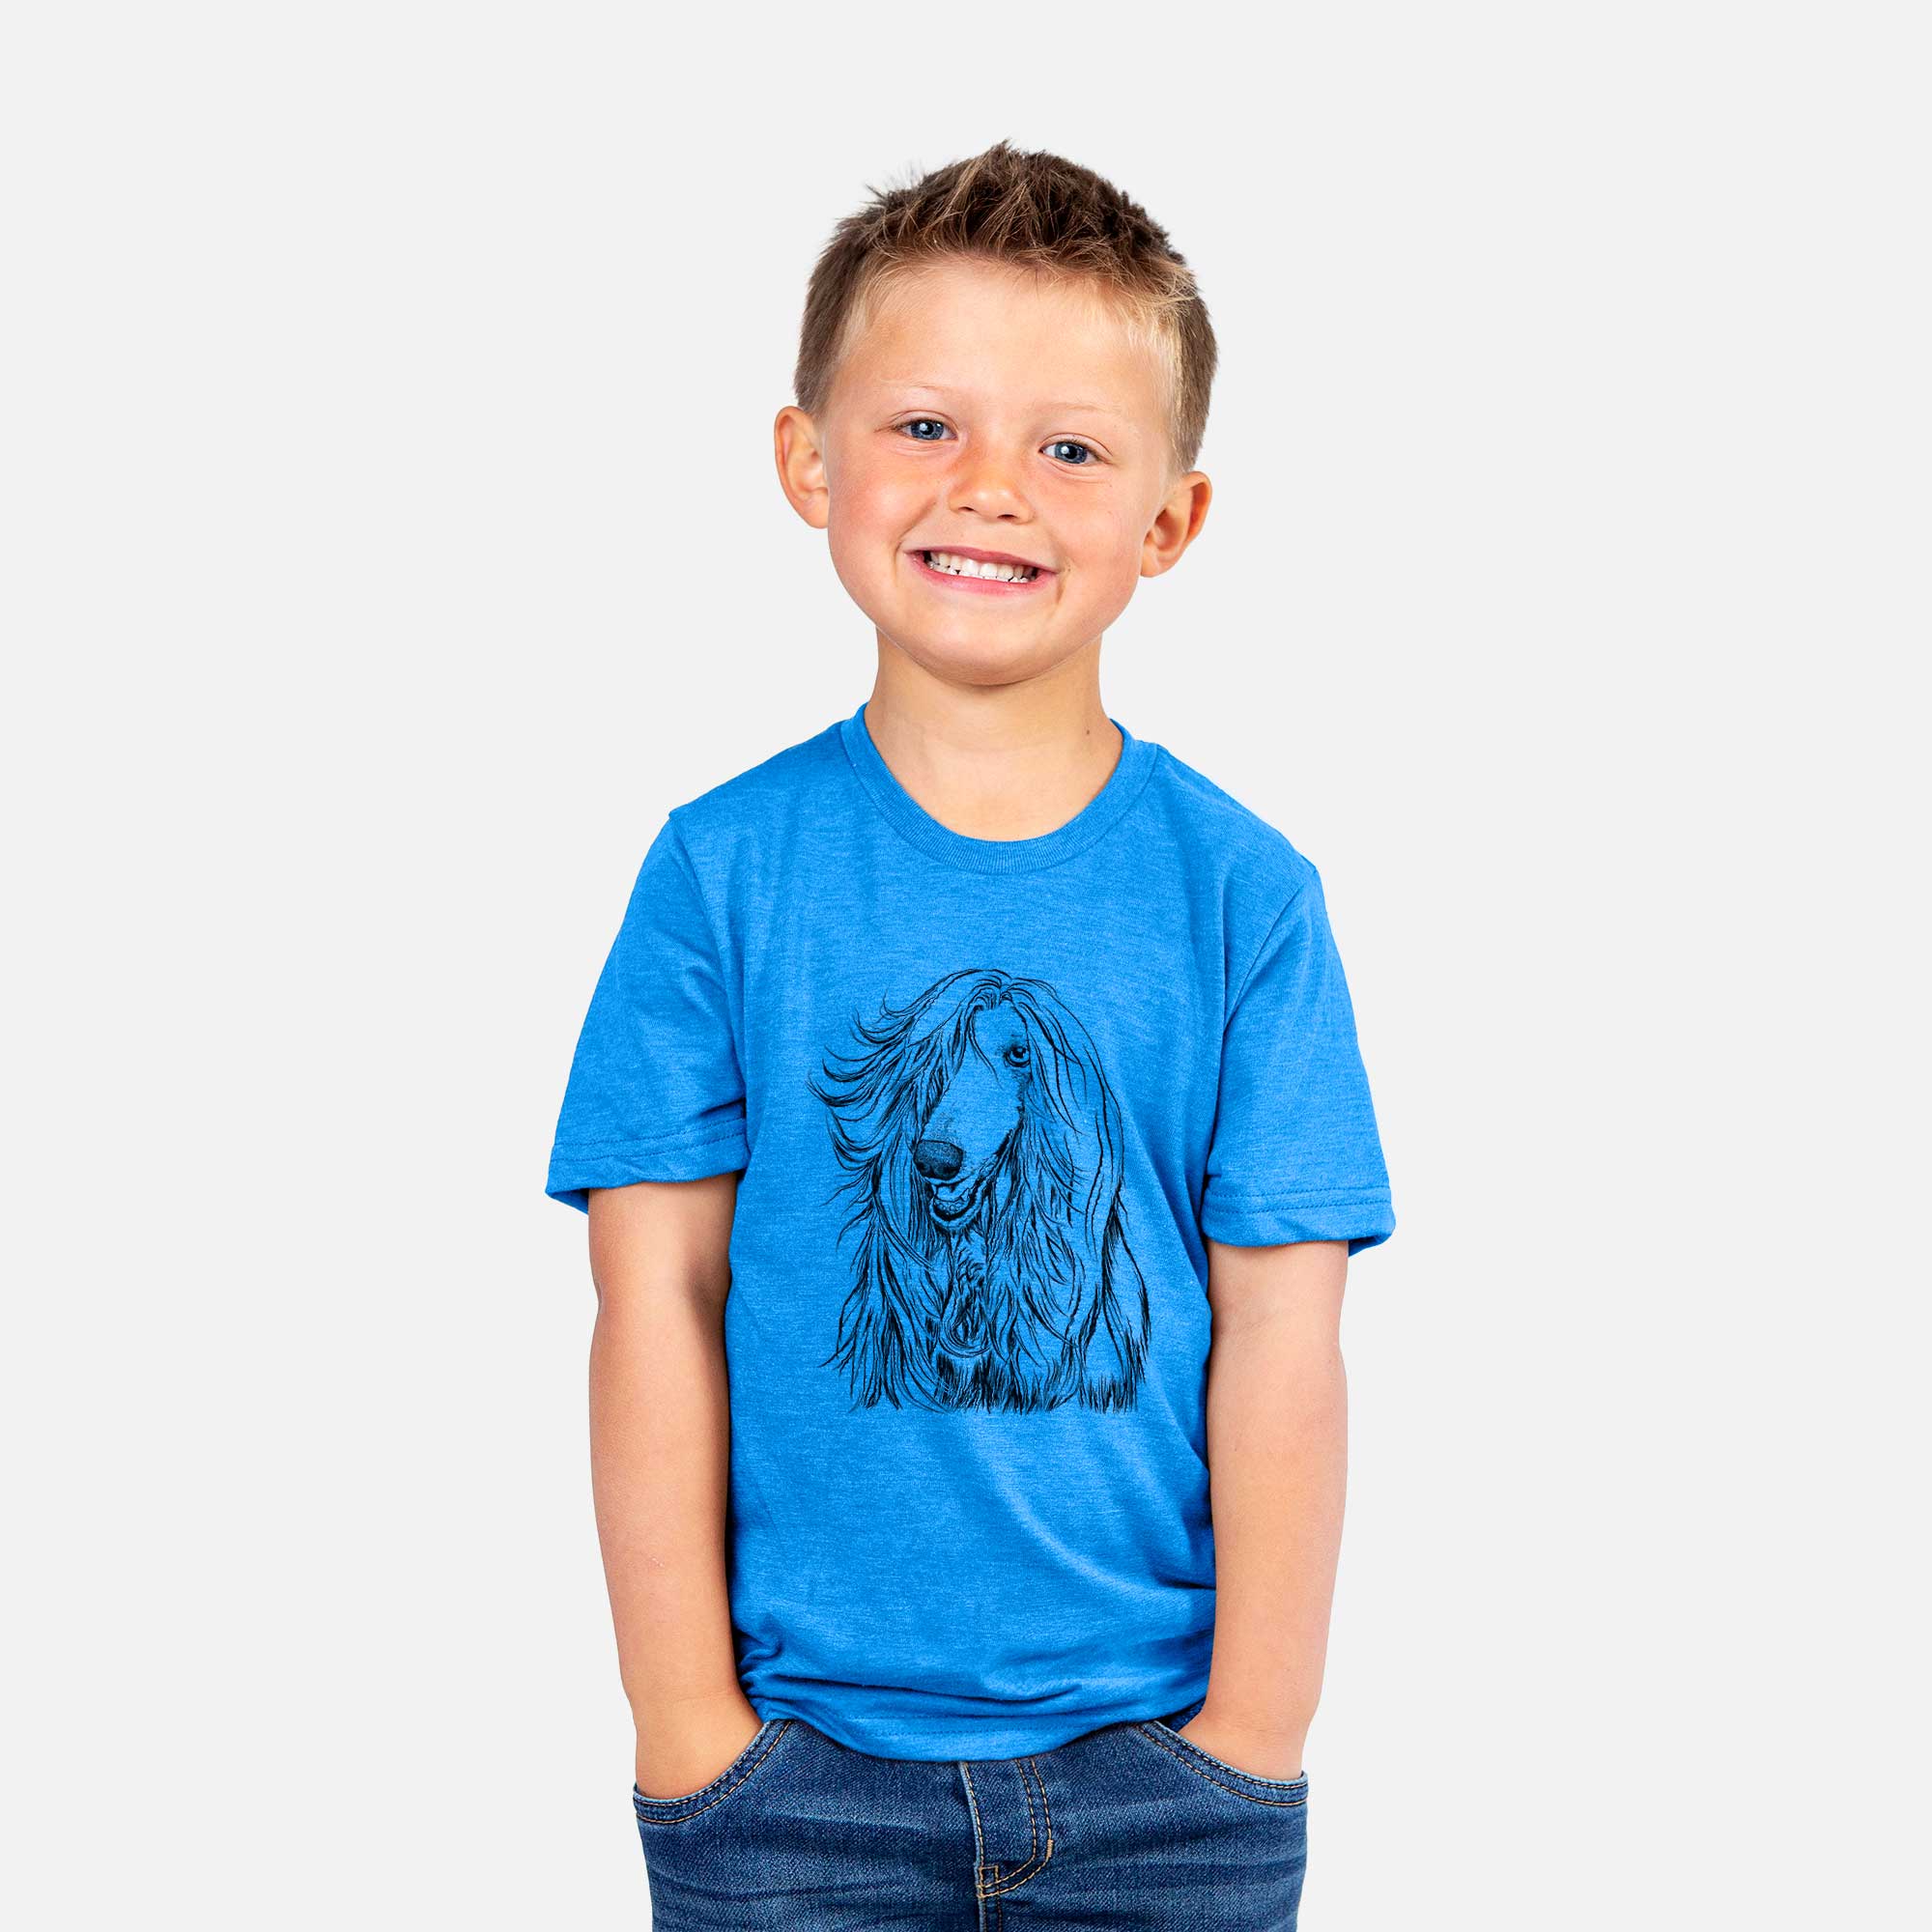 Bare Sterling the Afghan Hound - Kids/Youth/Toddler Shirt